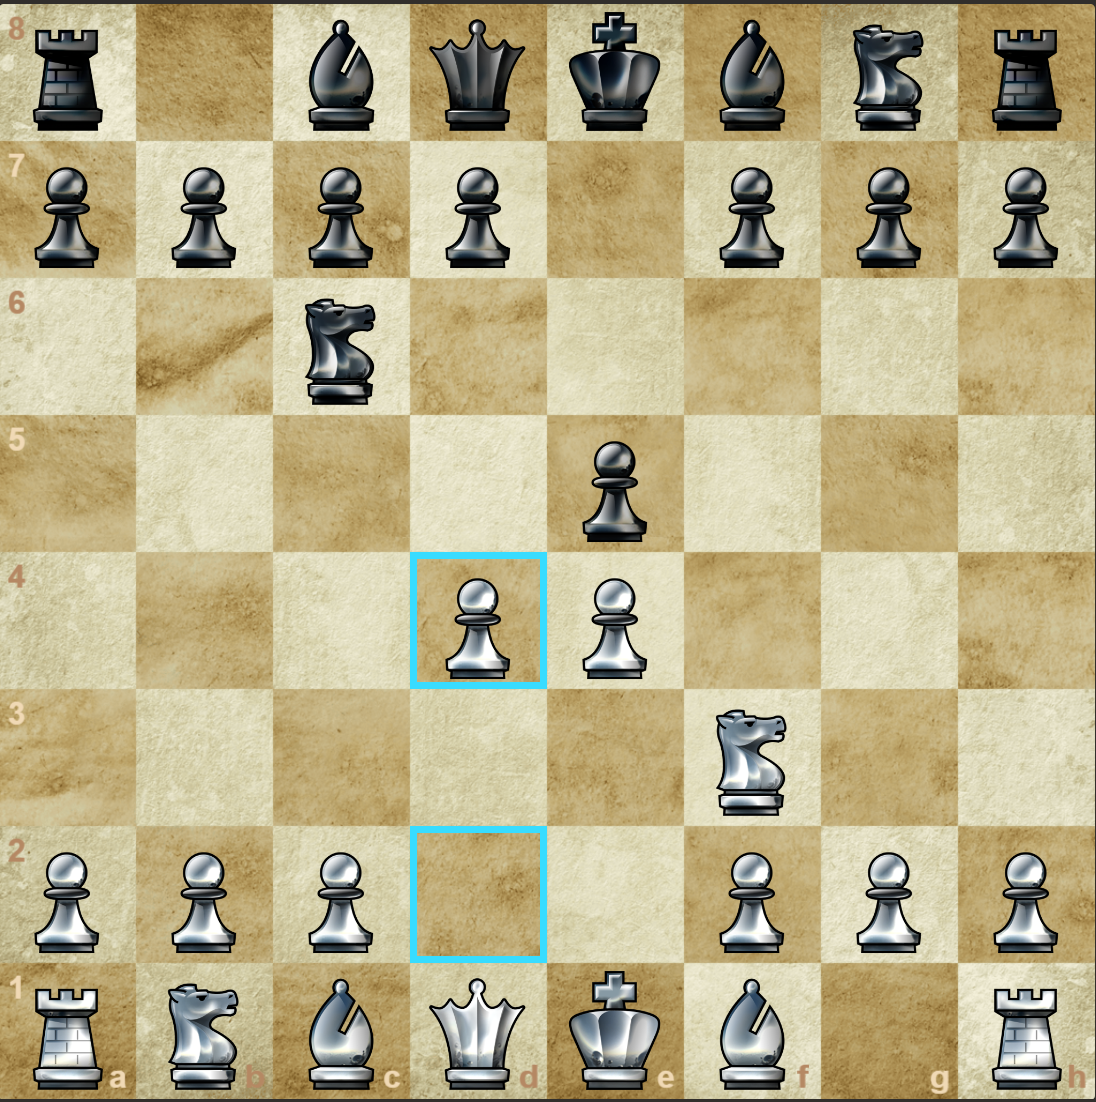 The Ruy Lopez Exchange Variation: A Strong,Solid Chess Opening 